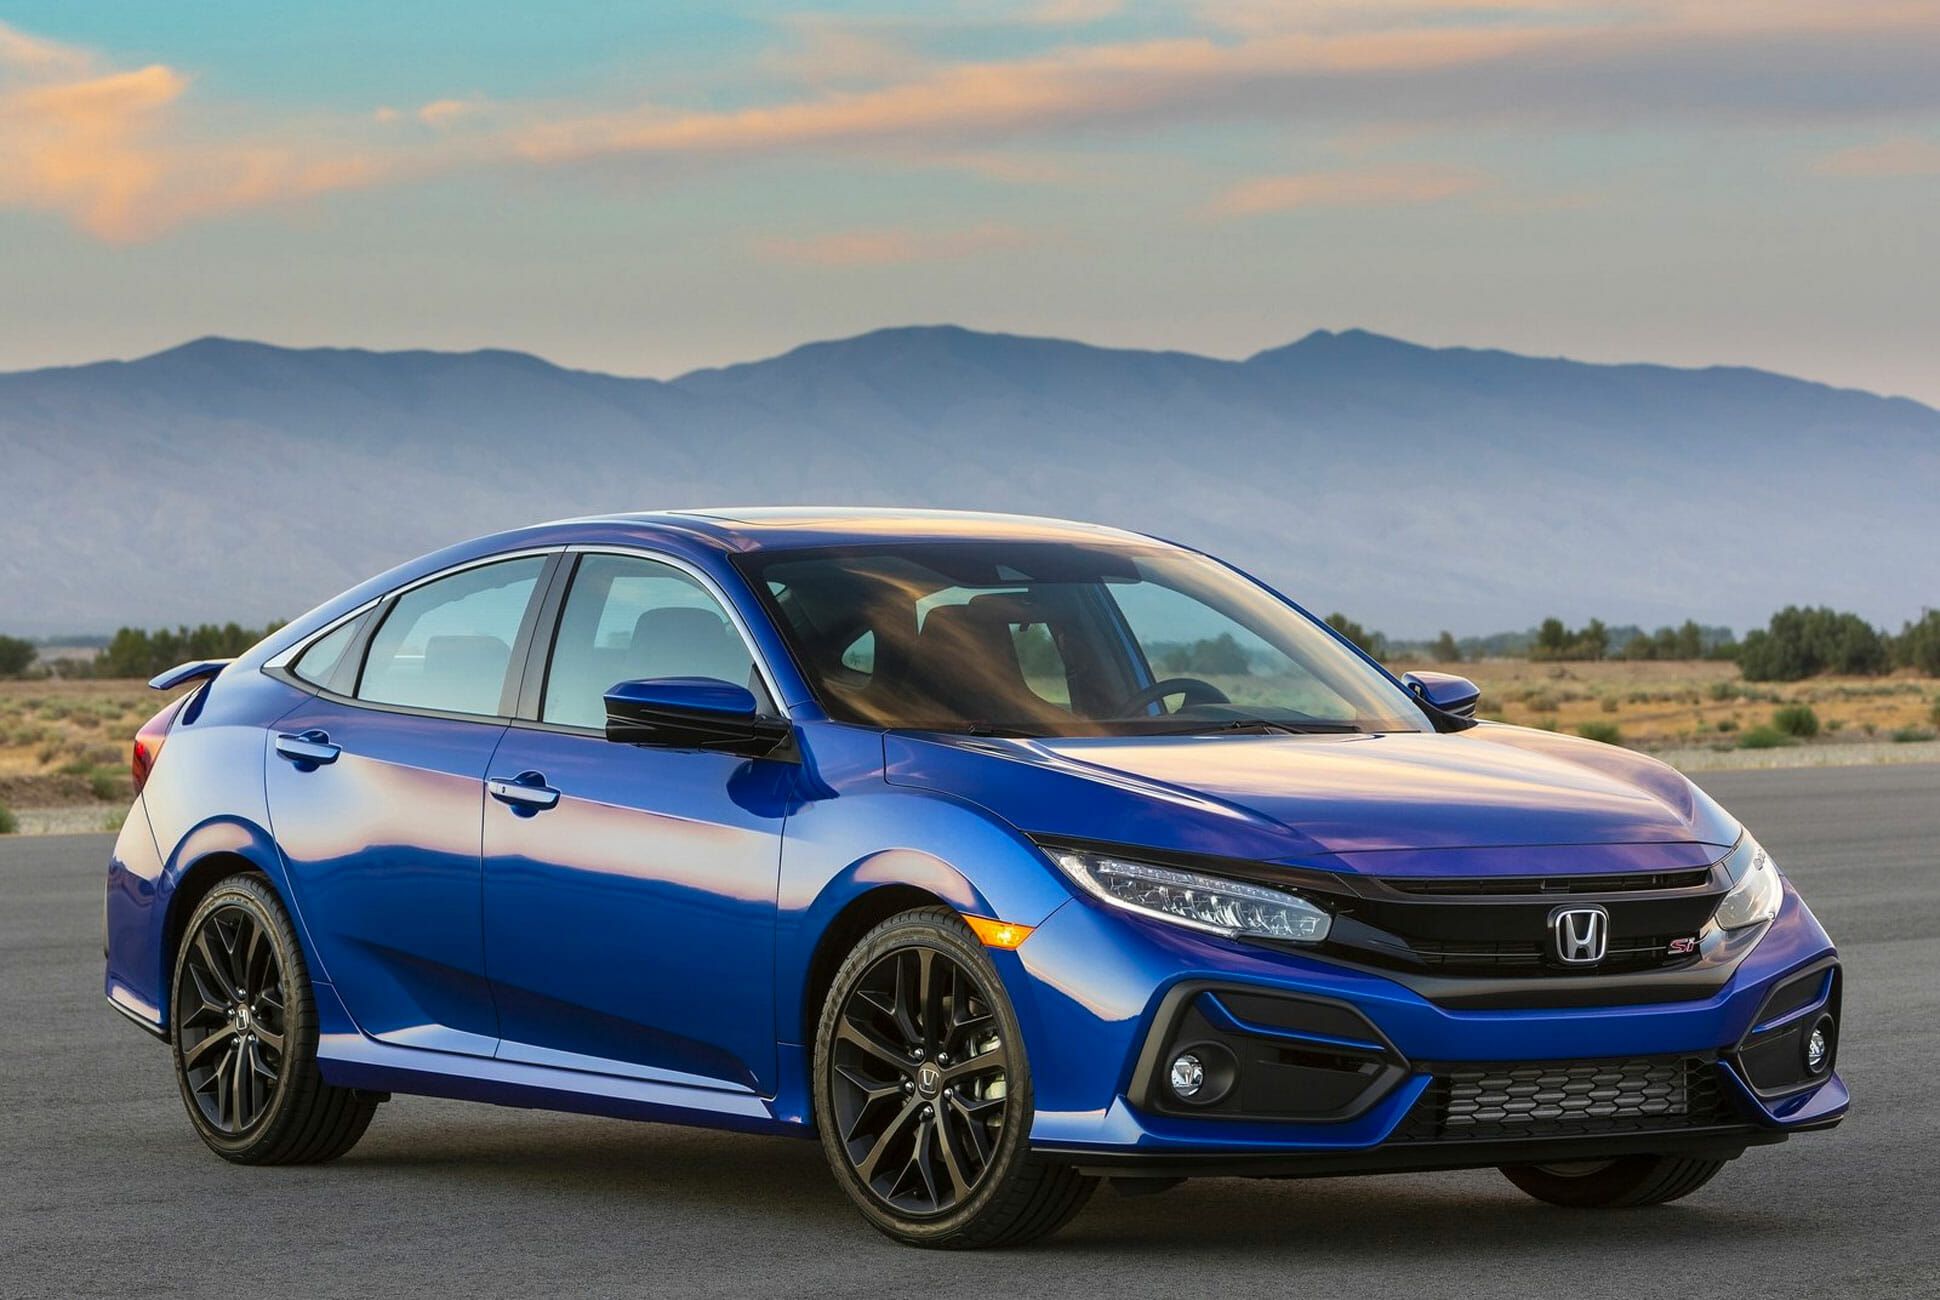 national flag fortvivlelse voldtage The Honda Civic Si May Be the Best Cheap Driver's Car You Can Buy